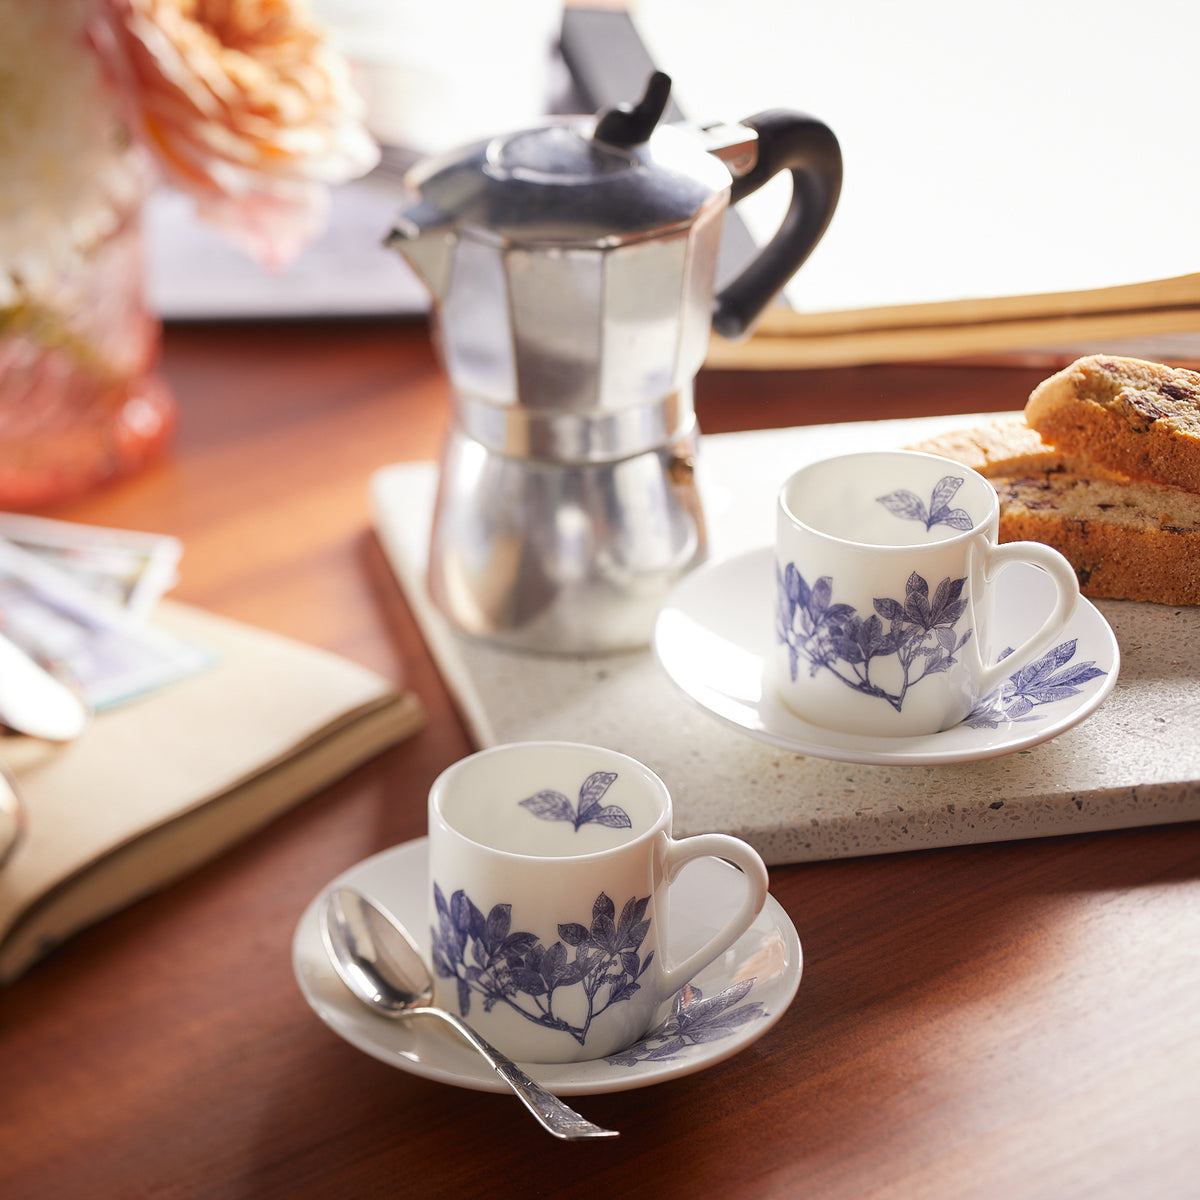 Two Arbor Espresso Cups &amp; Saucers, Set of 2, by Caskata with blue floral designs, part of a blue and white dinnerware set, sit on saucers next to a silver coffee maker and sliced bread on a tray on a wooden table.